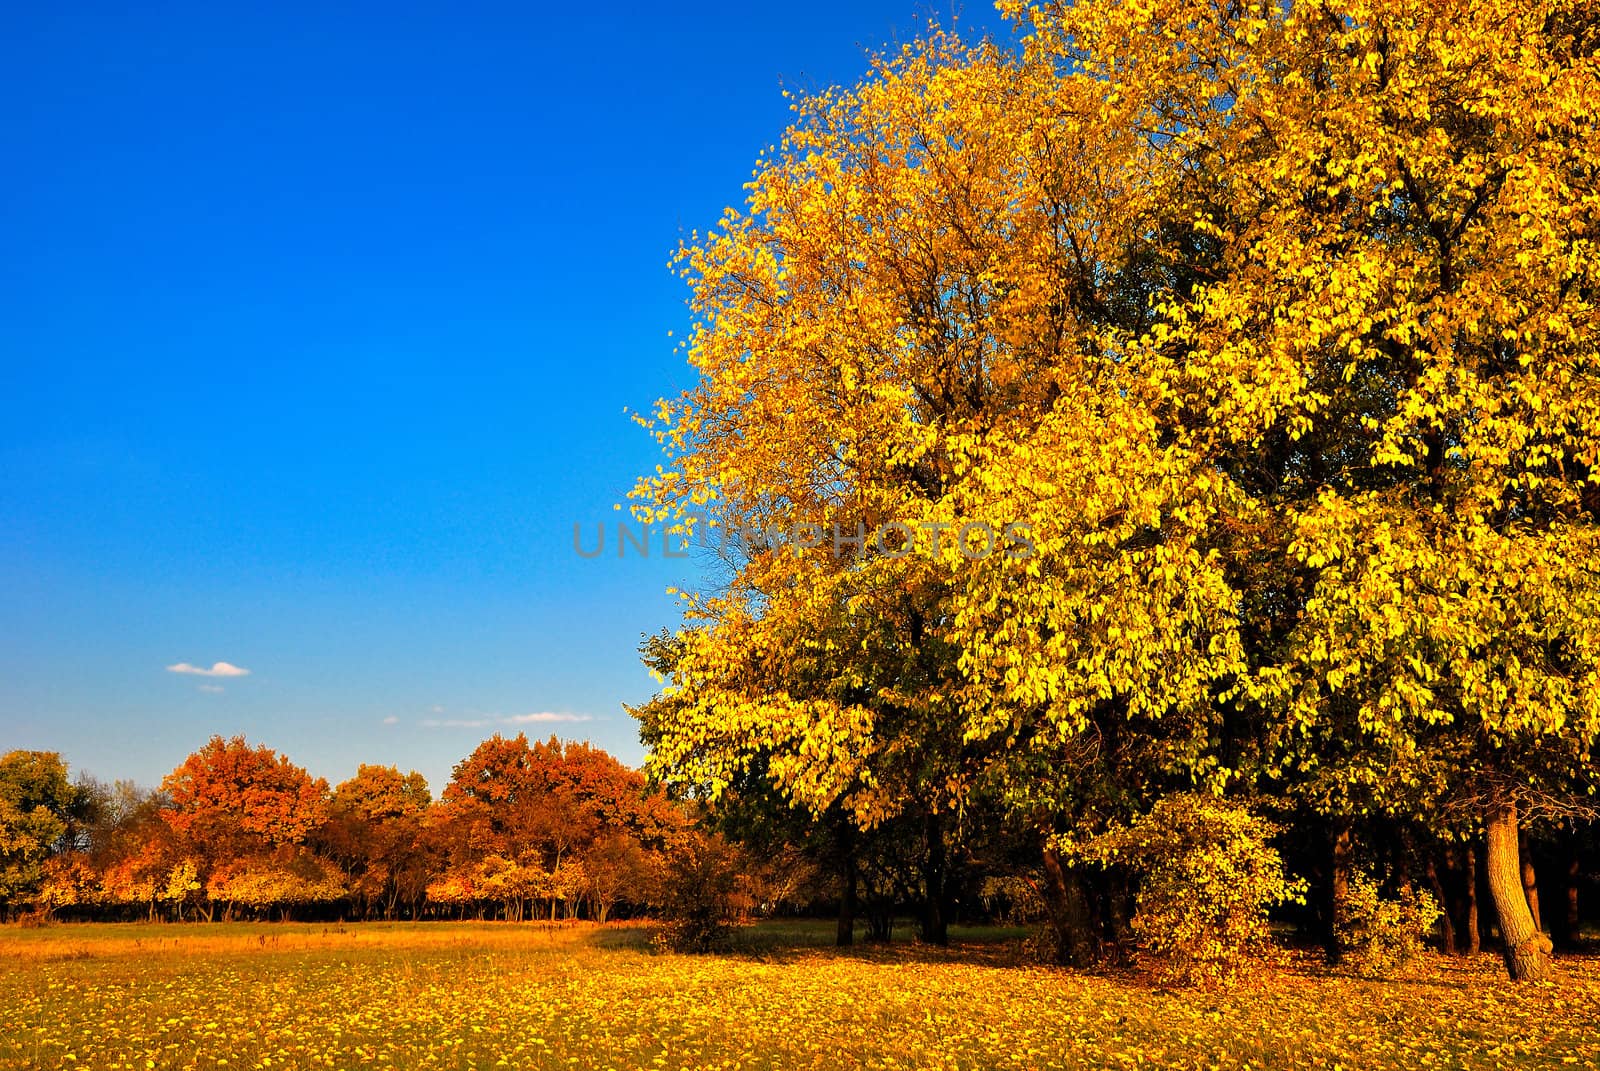 Autumn tree in the meadow before the forest under a blue sky